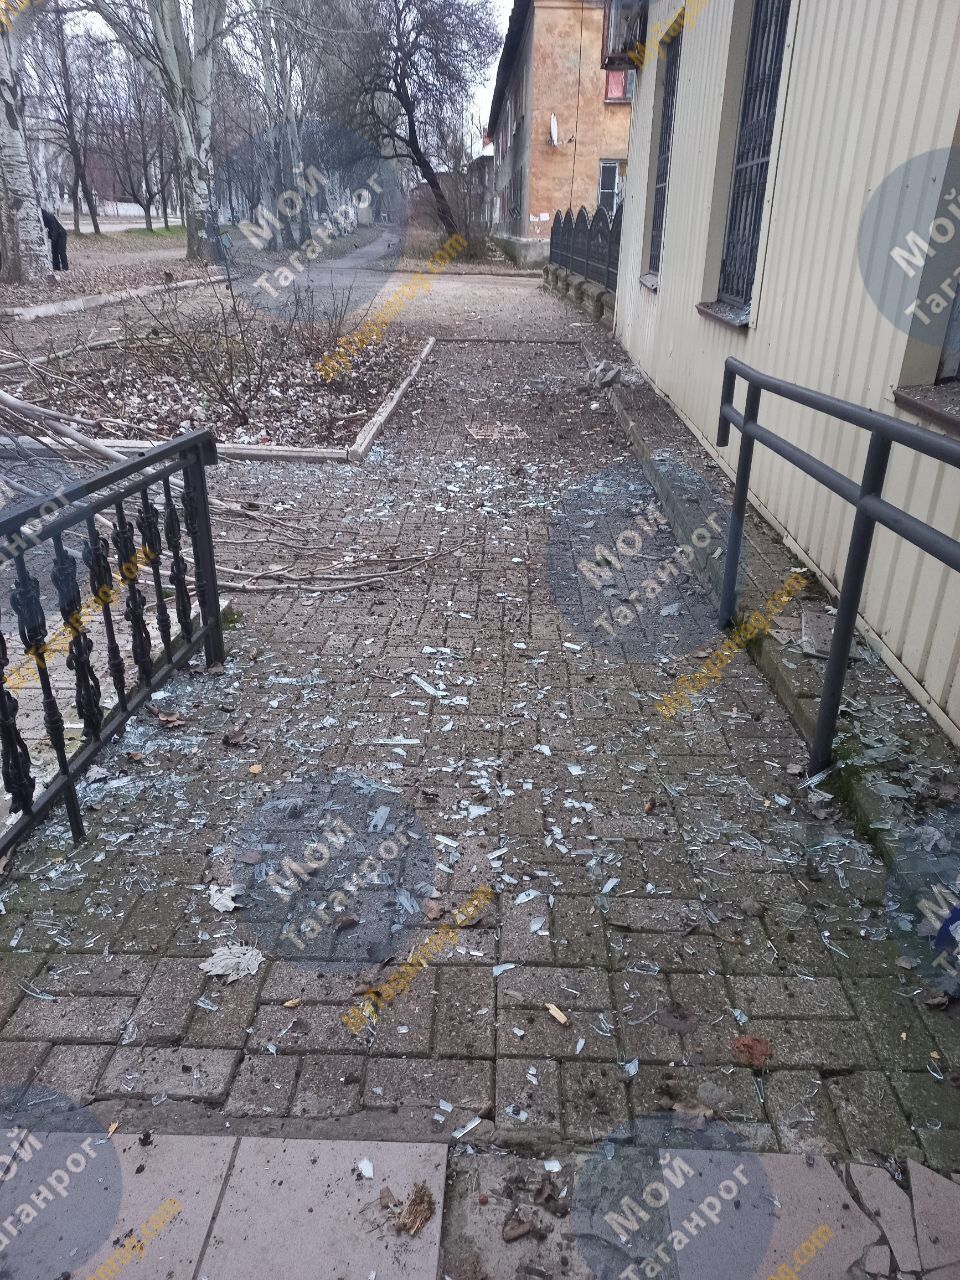 The windows were shattered: A powerful explosion occurred in Taganrog, and smoke rose. Photos and video